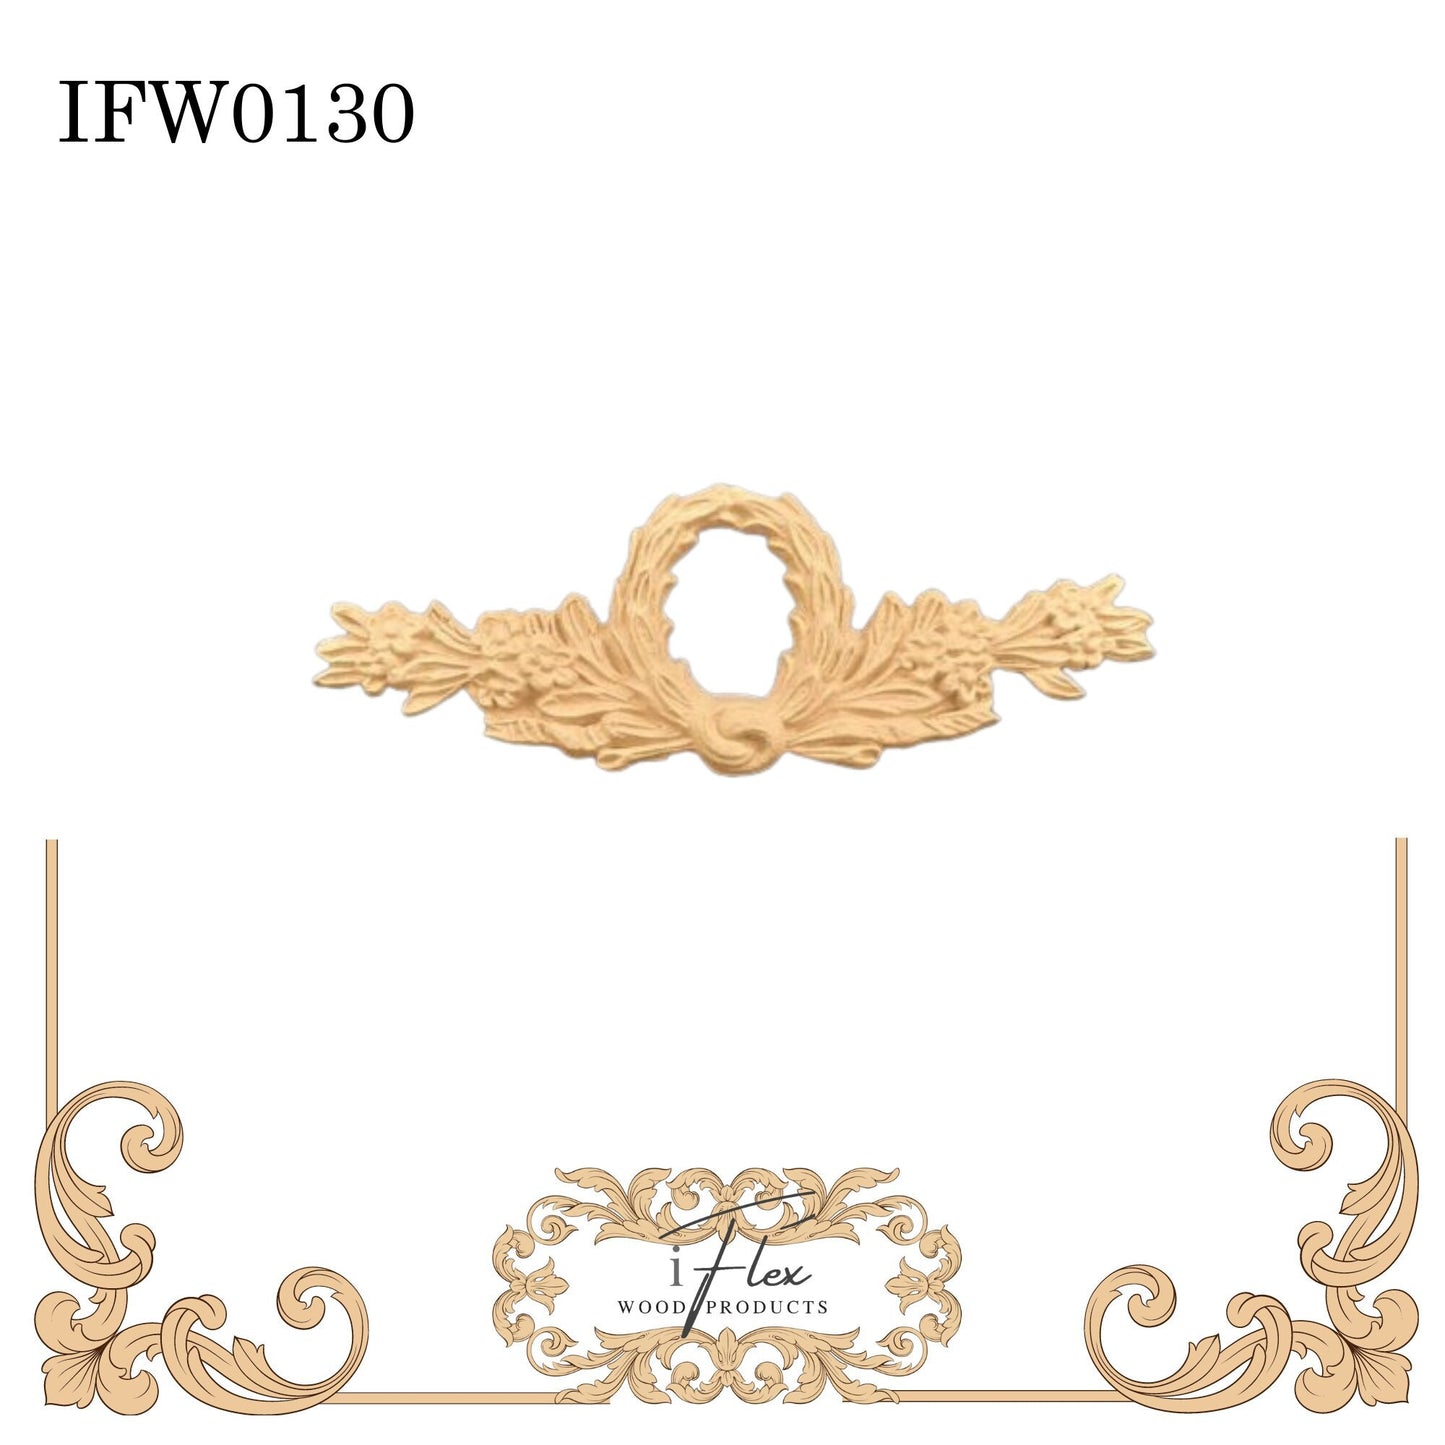 IFW 0130  iFlex Wood Products Flower Garland bendable mouldings, flexible, wooden appliques